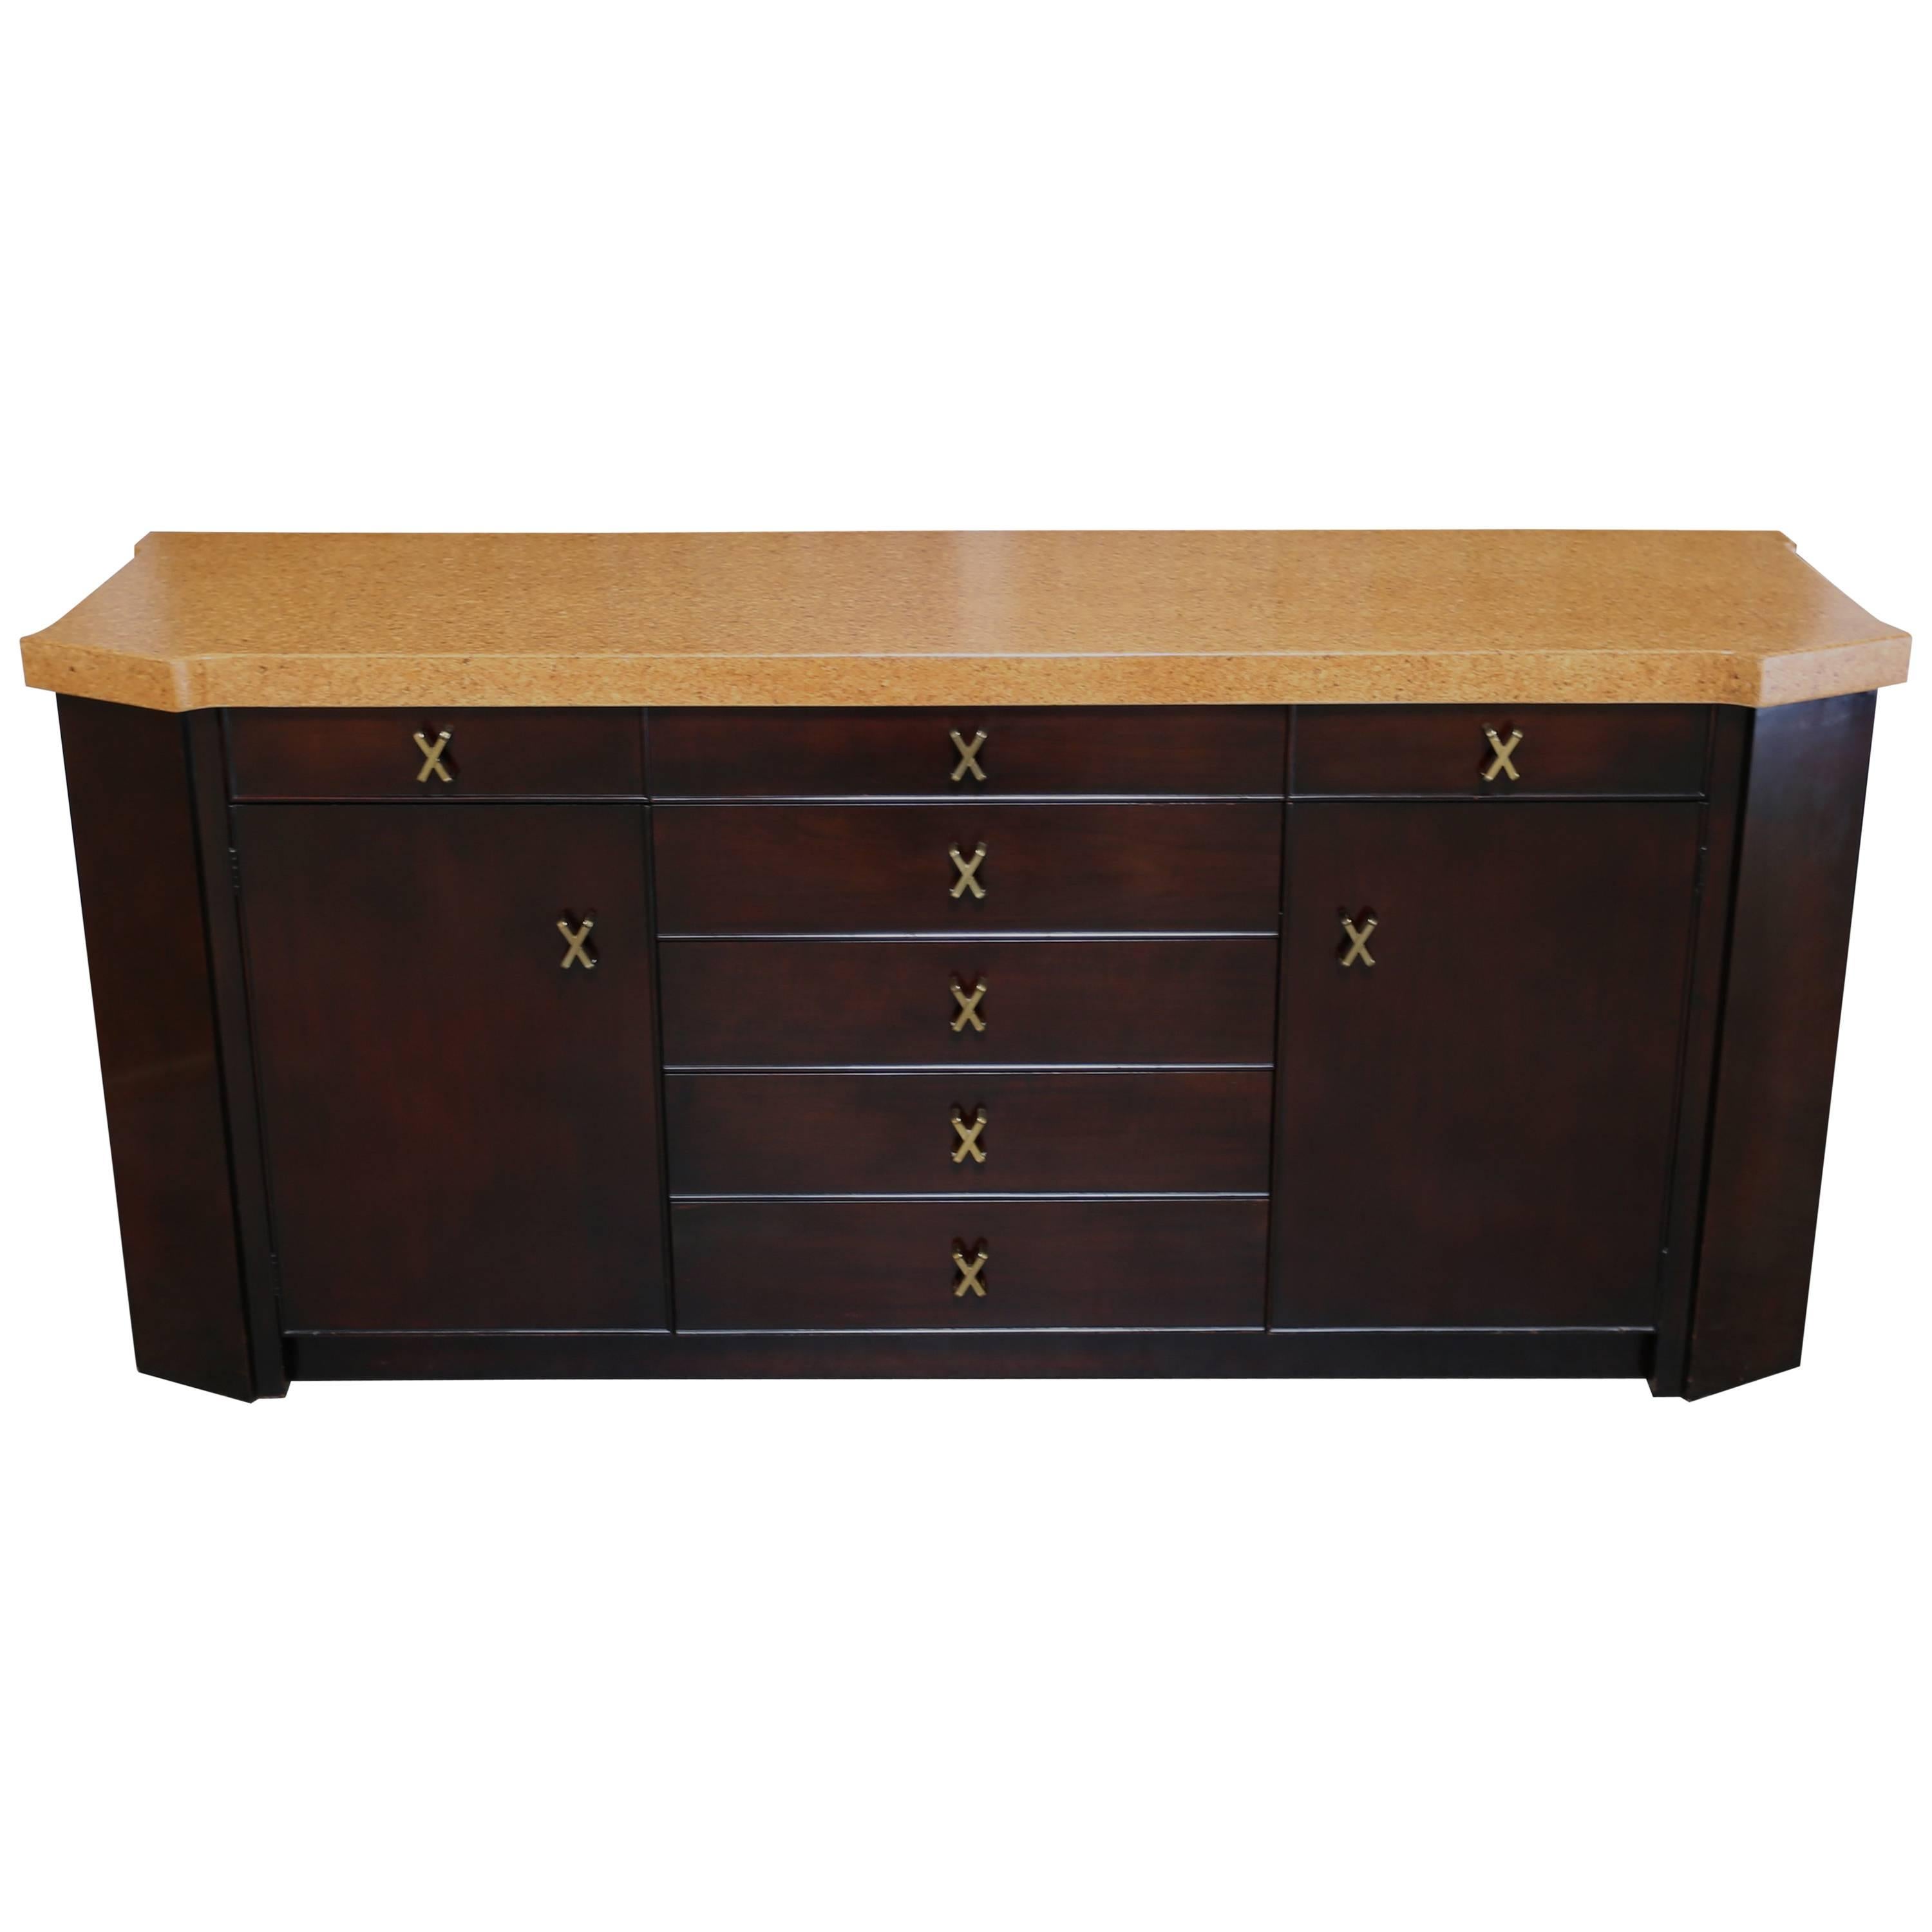 Cork Top Credenza by Paul Frankl